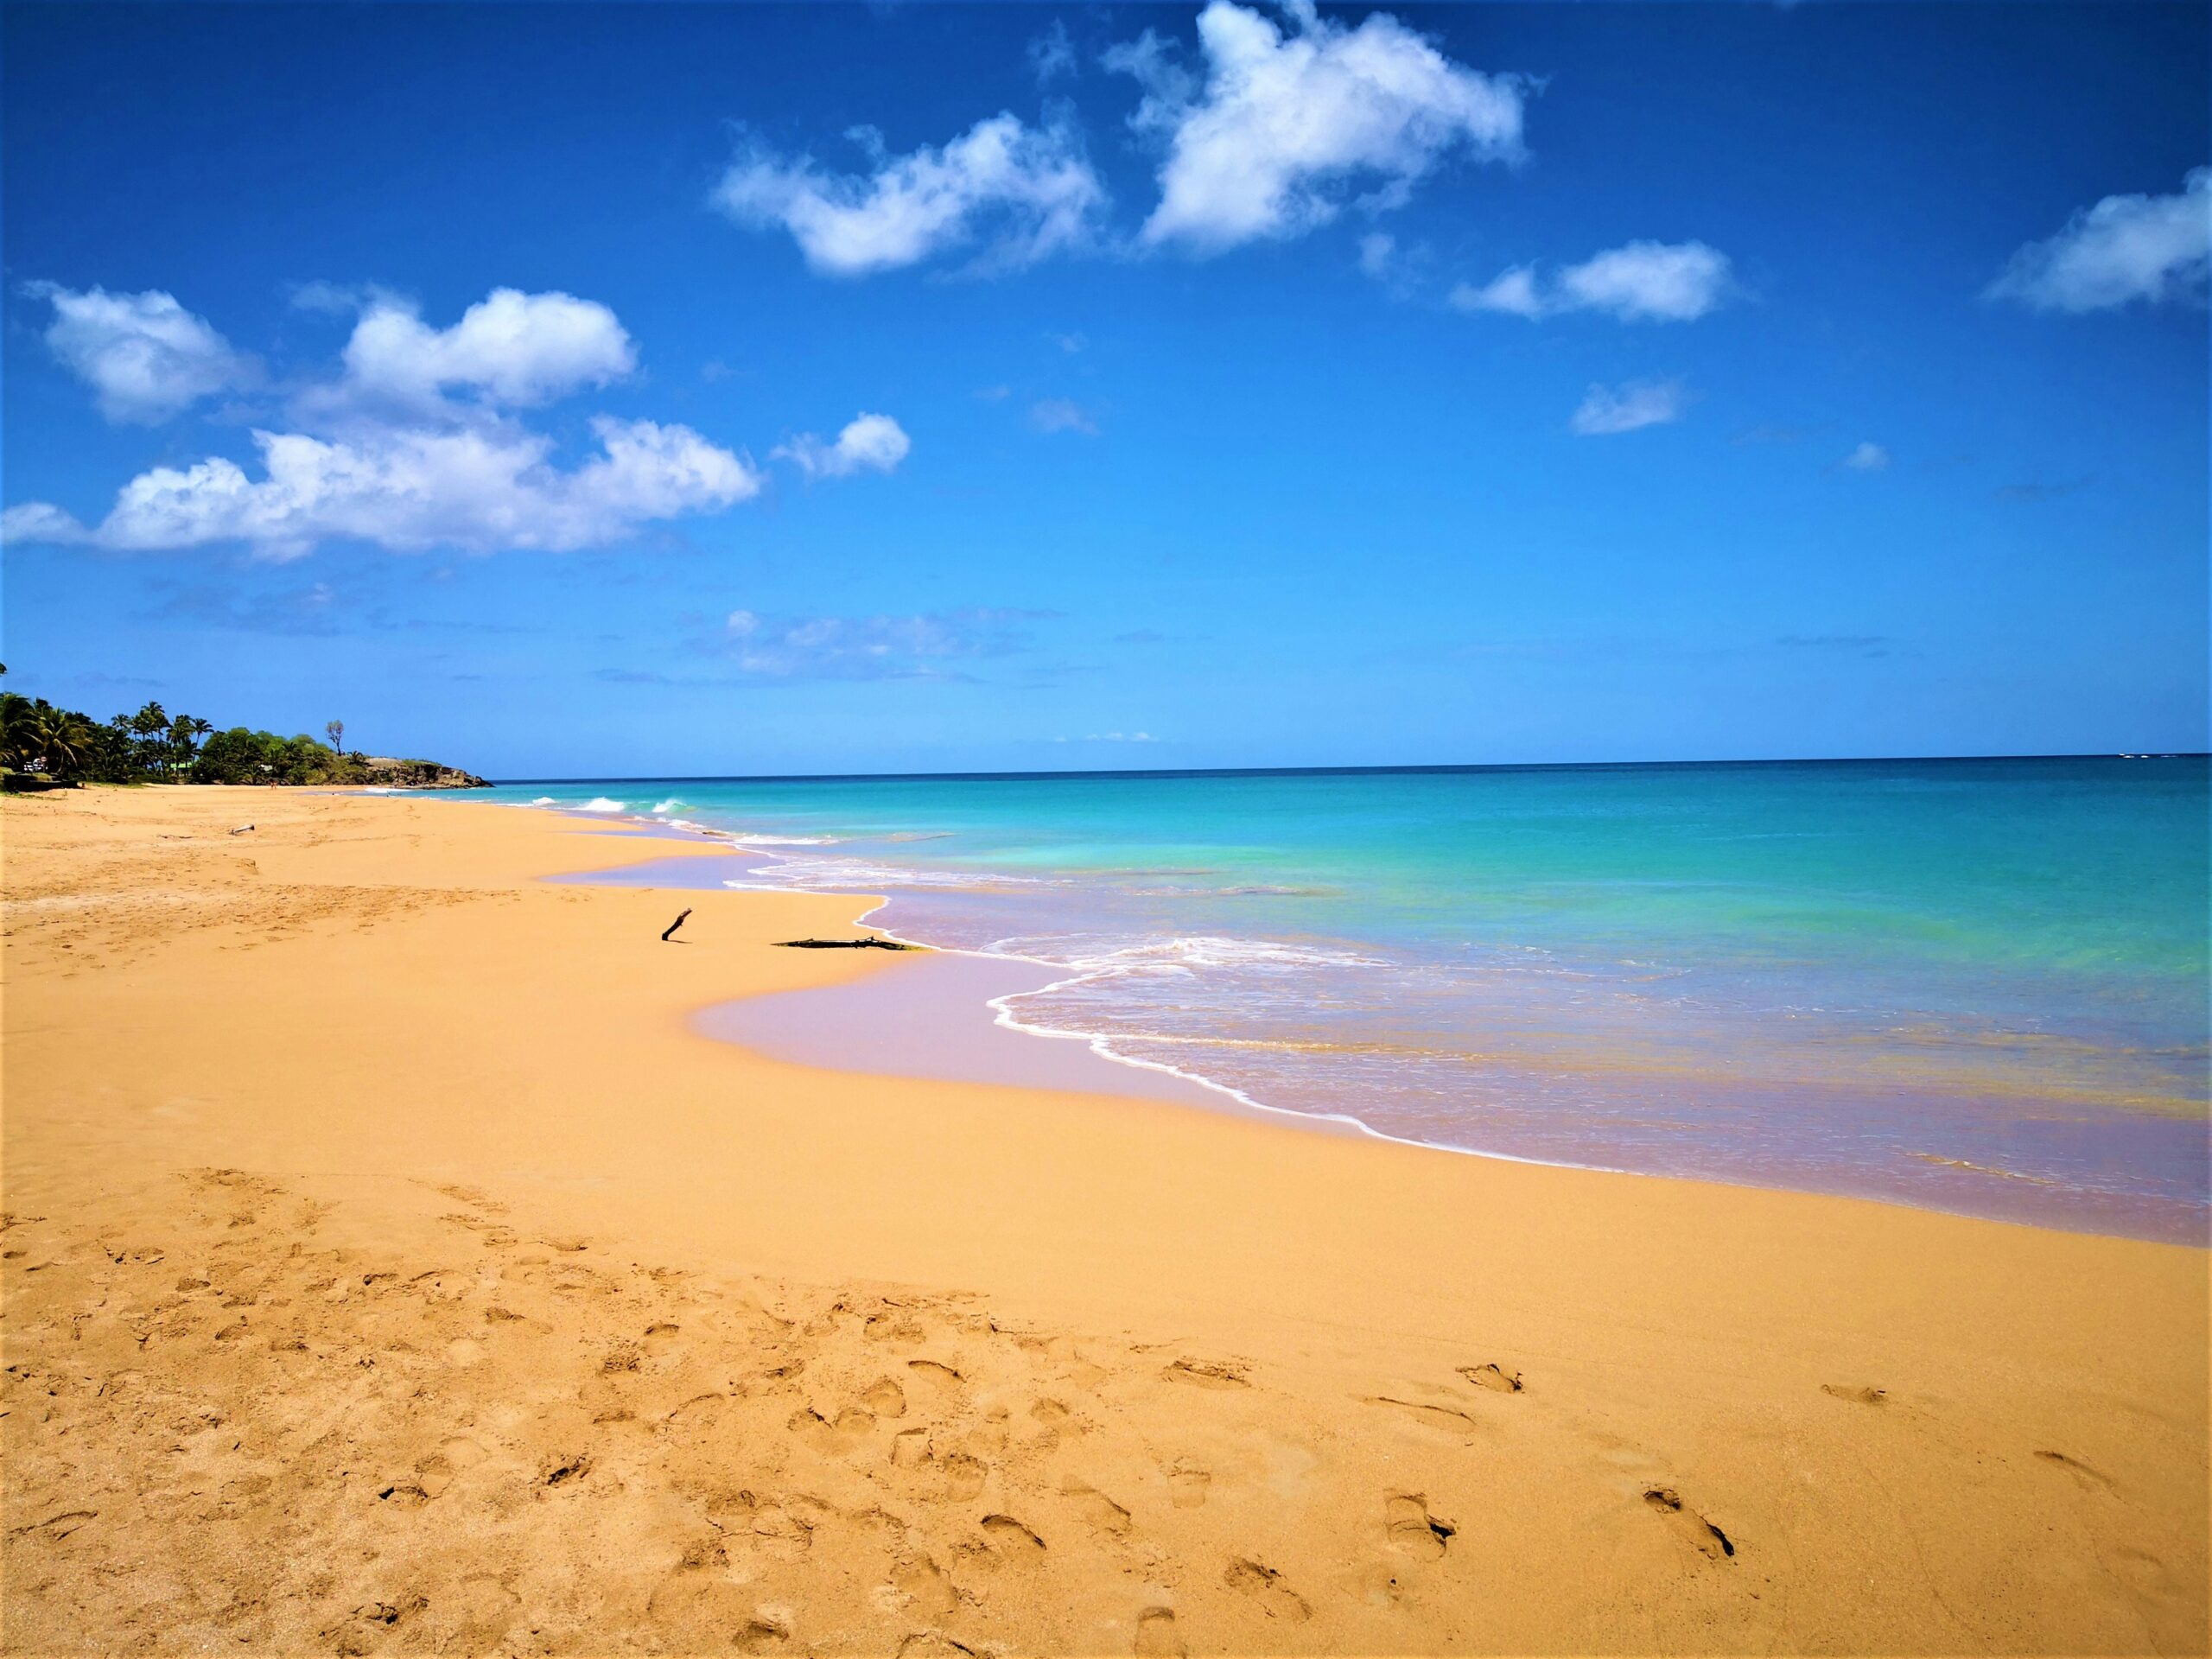 This destination in Guadeloupe is one of the most important filming locations for the series “Death in Paradise”.
Pictured: a warm beach with tan sands and turquoise waters